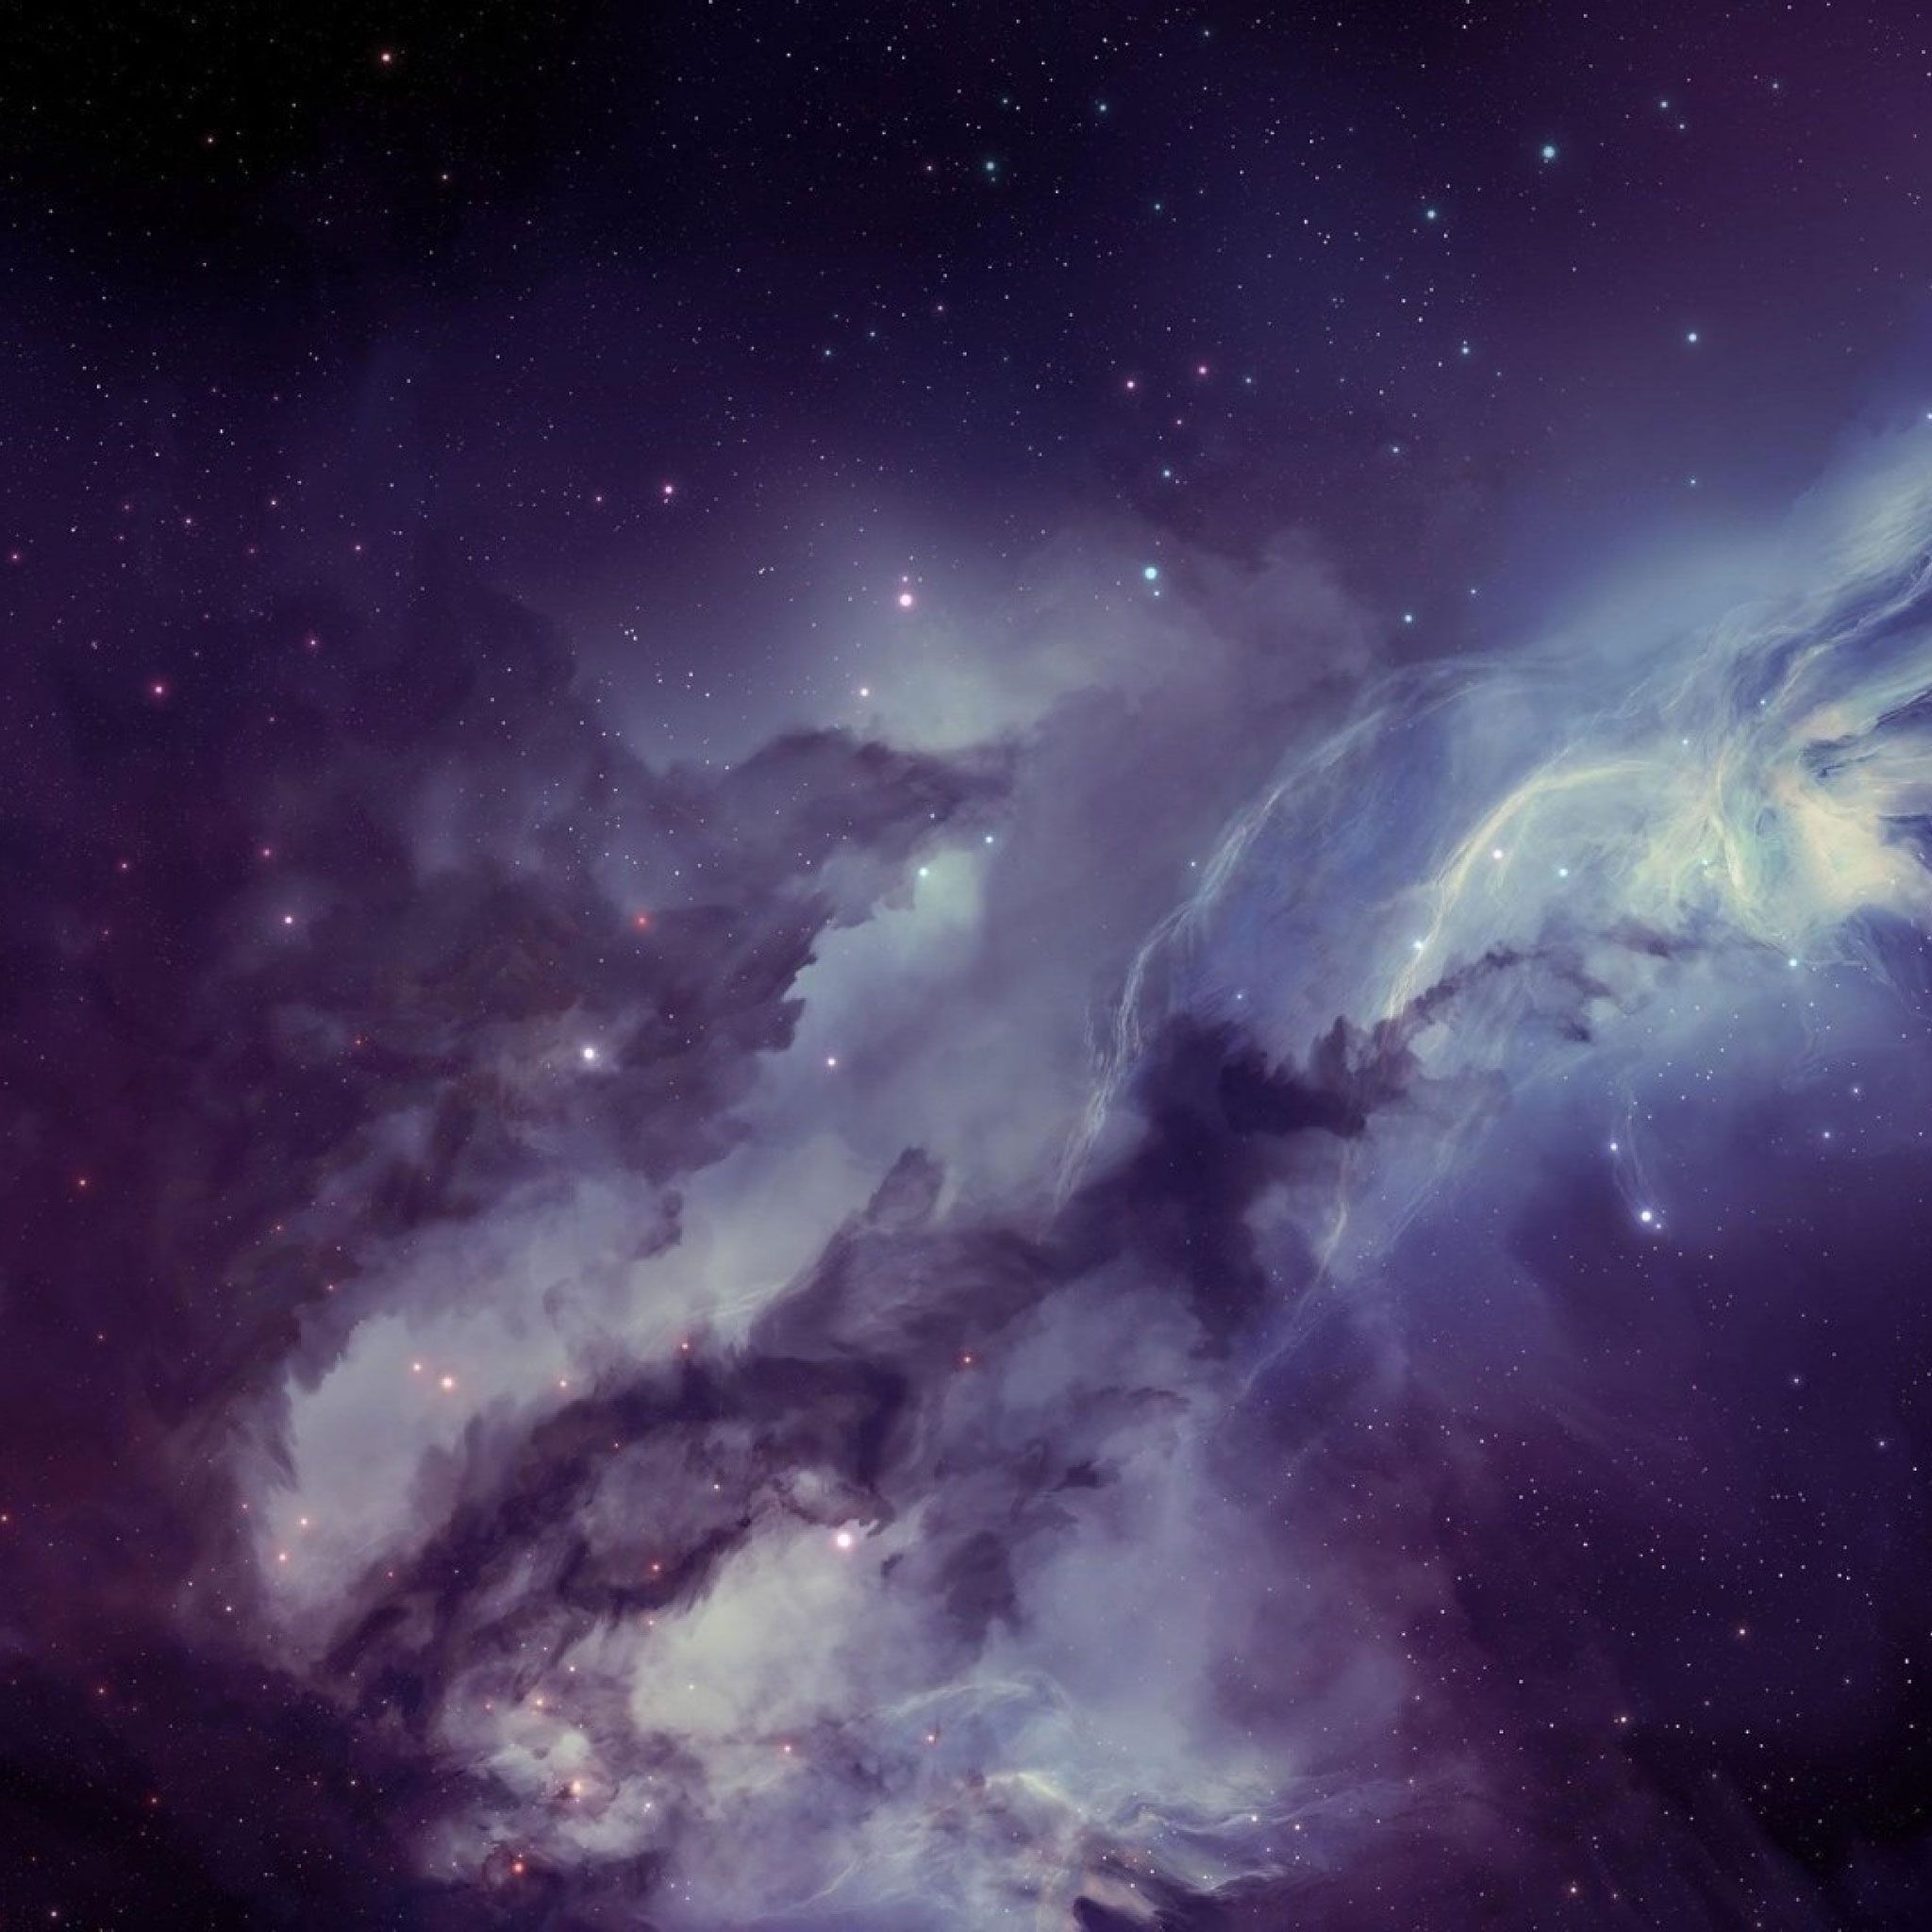 A purple and blue space with stars - Galaxy